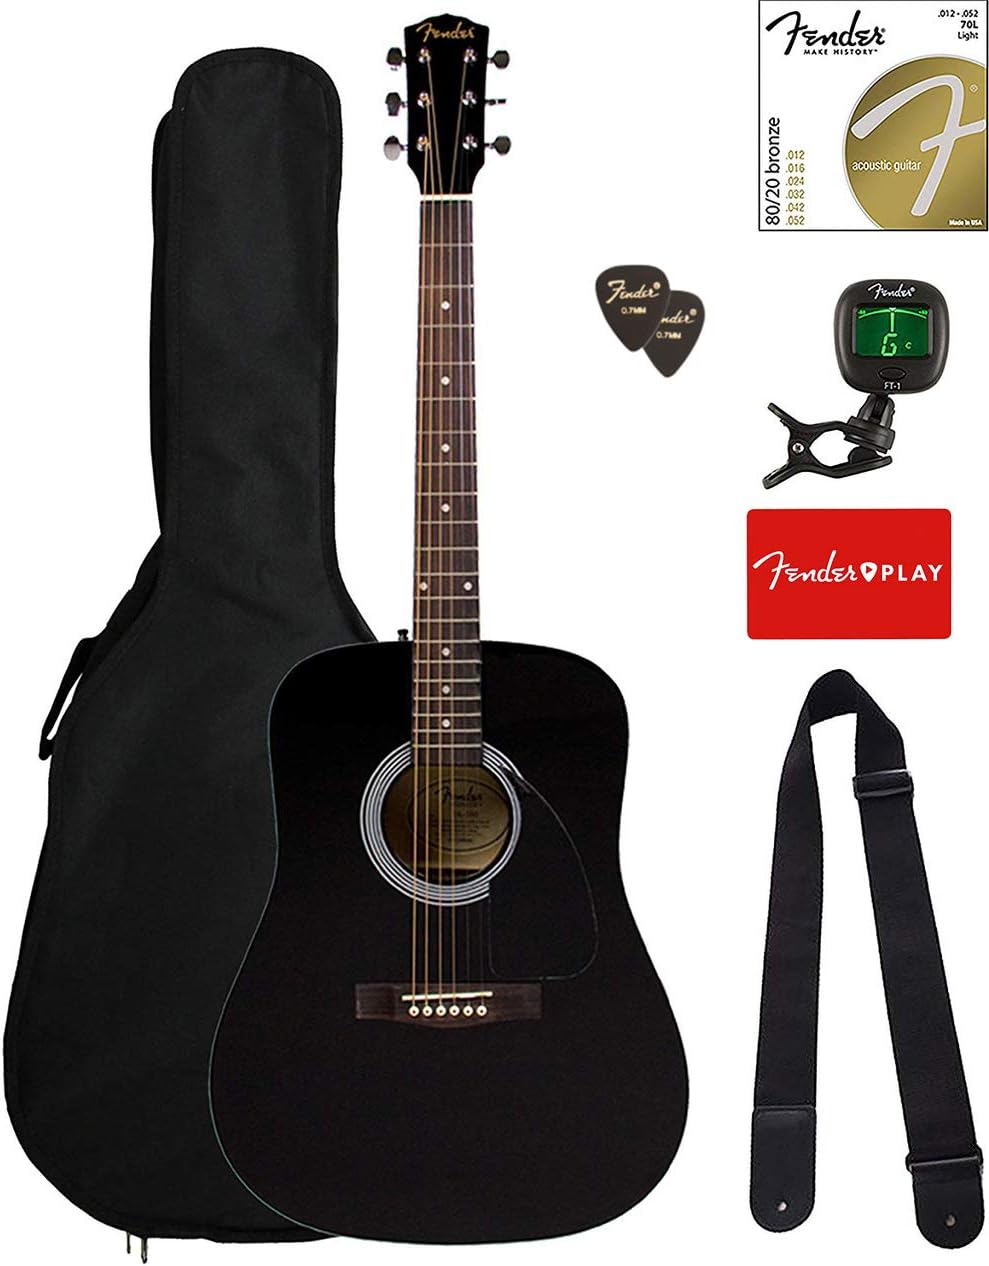 Fender FA-115 Dreadnought Acoustic Guitar – Black Bundle with Gig Bag, Tuner, Strings, Strap, and Picks Review